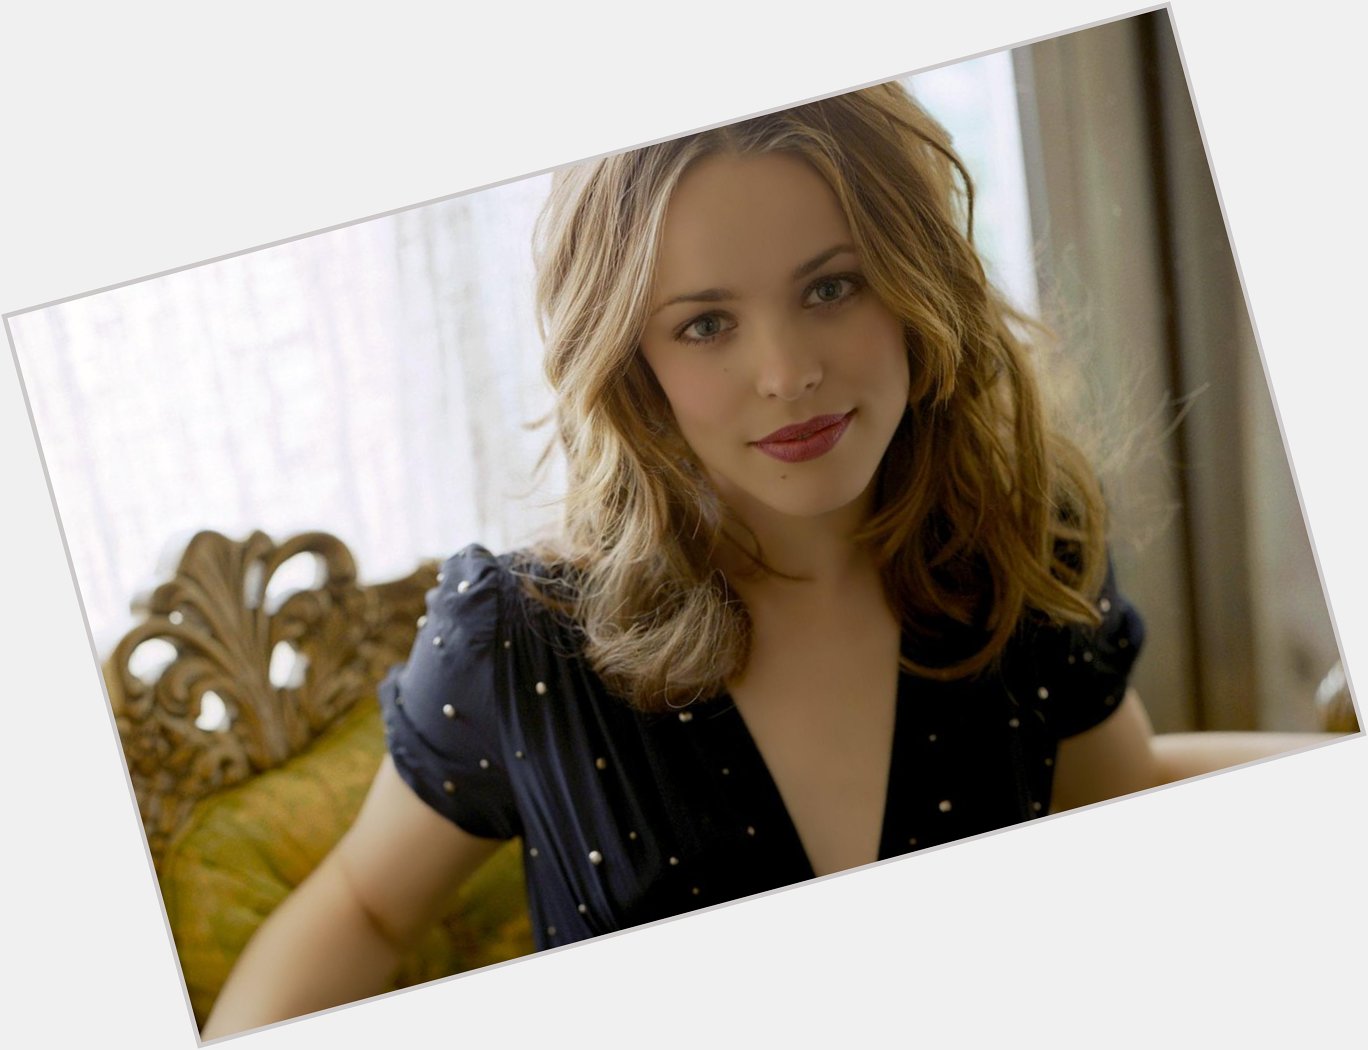   Happy 36th B-day to Rachel McAdams, the nicest "Mean Girl" I ever knew...  happy birthday babe!!